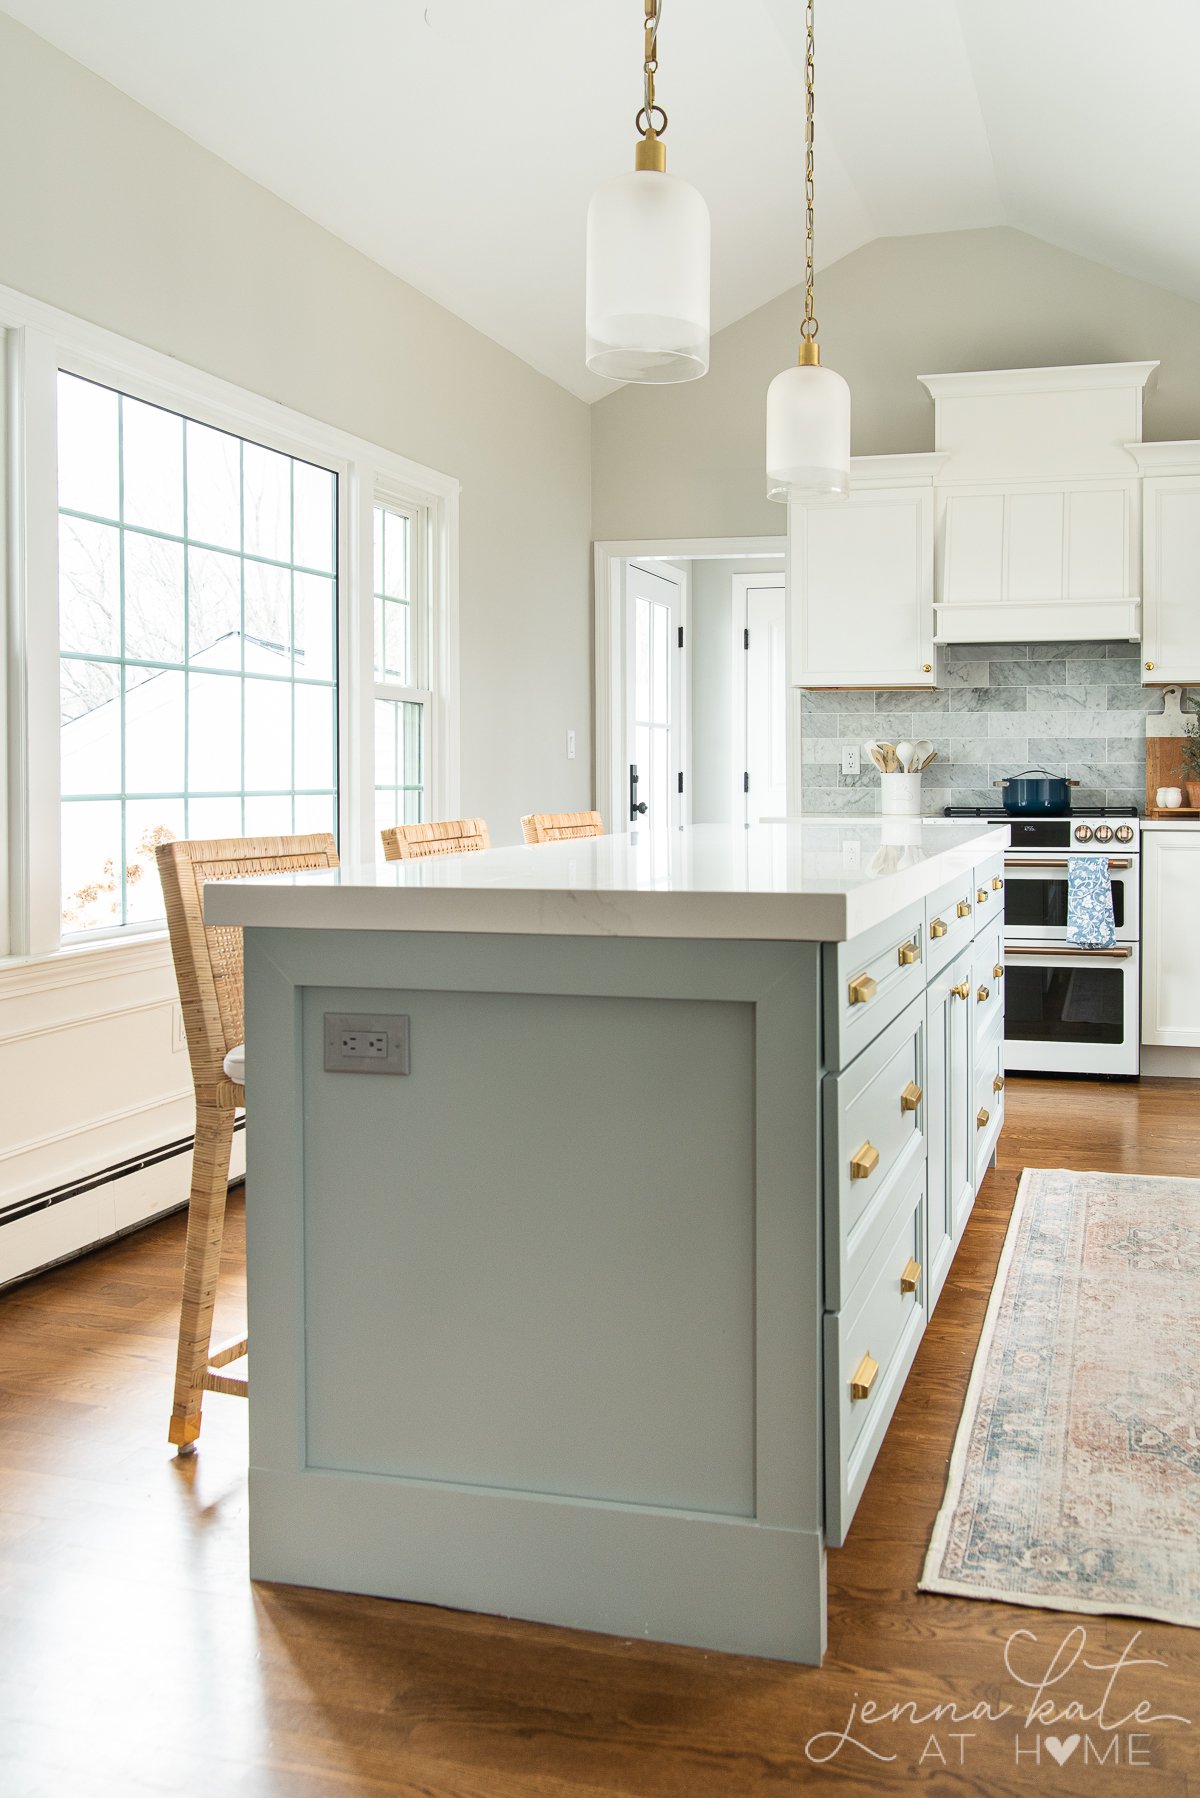 Kitchen with blue island and white cabinets and walls painted Repose Gray